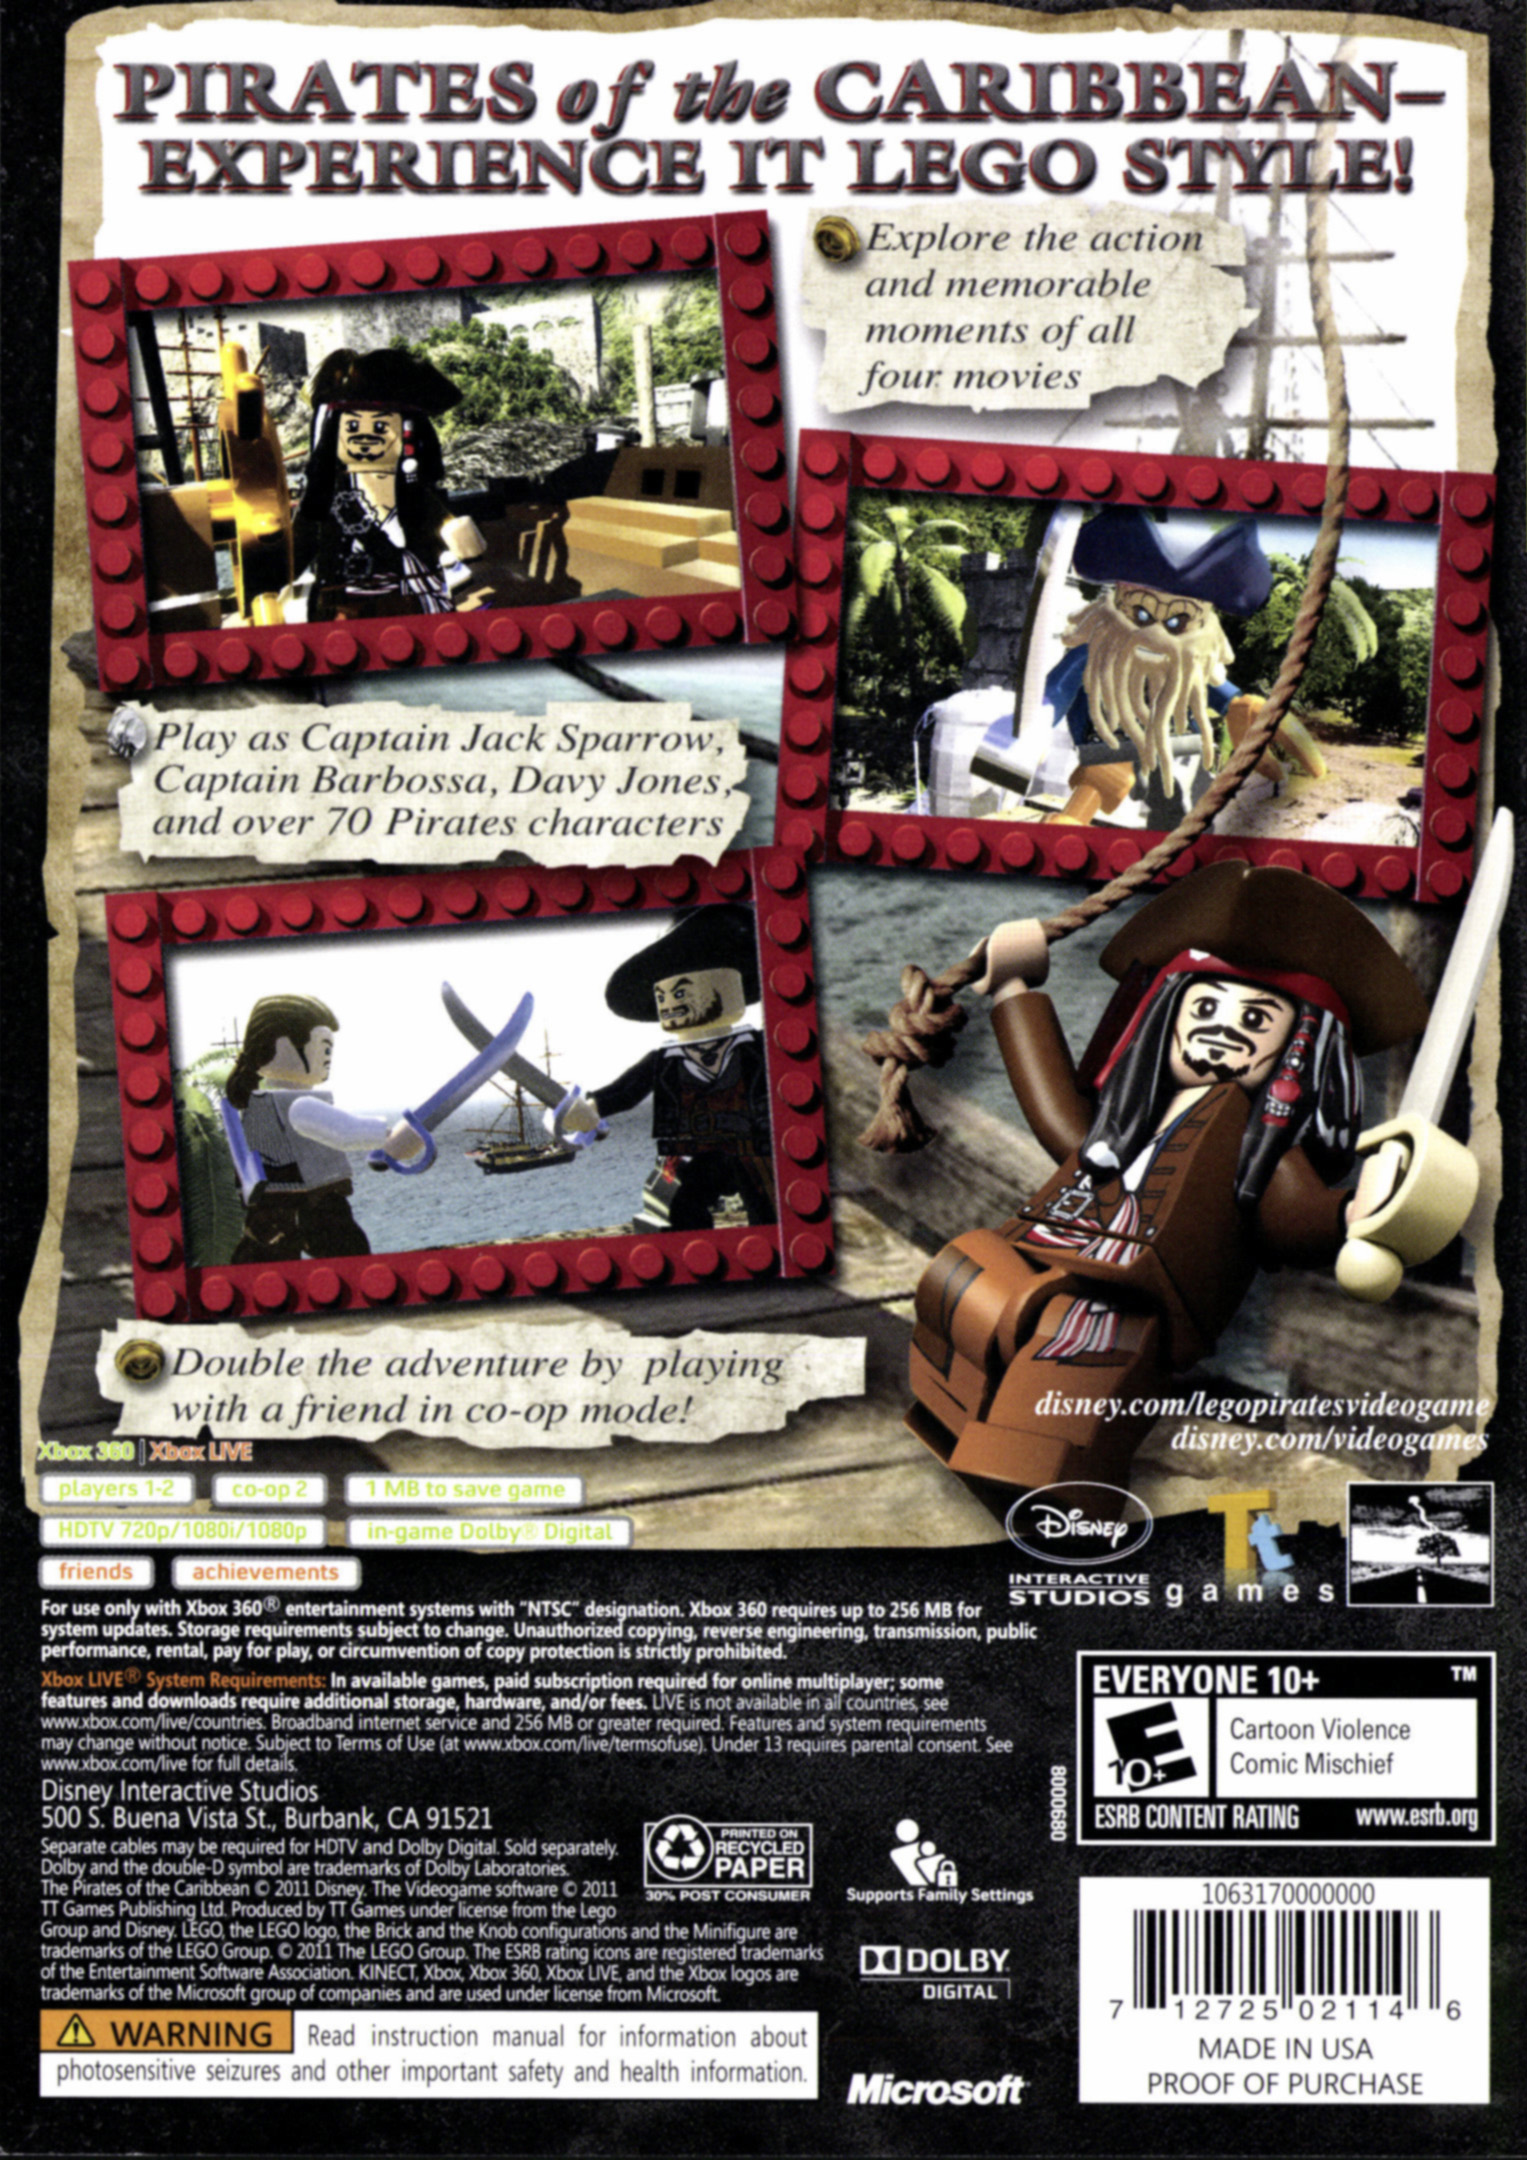 LEGO Pirates of the Caribbean: The Video Game [Disney] - image 2 of 8